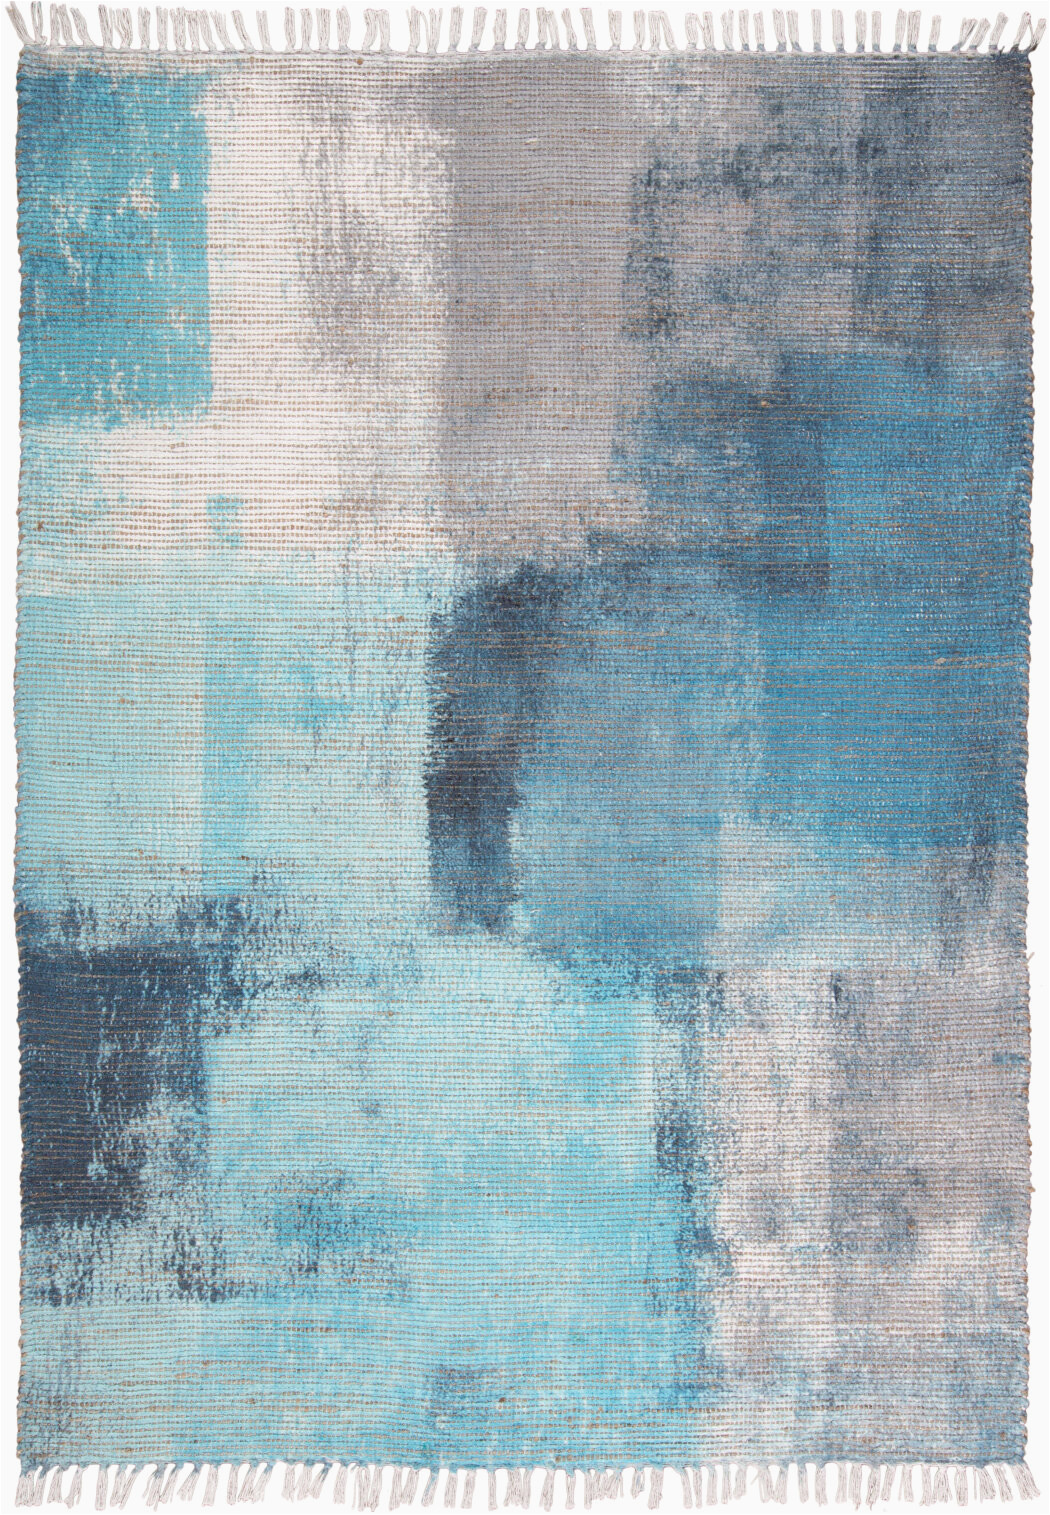 Blue and Gray Throw Rugs Dahlia Abstract Blue Gray area Rug